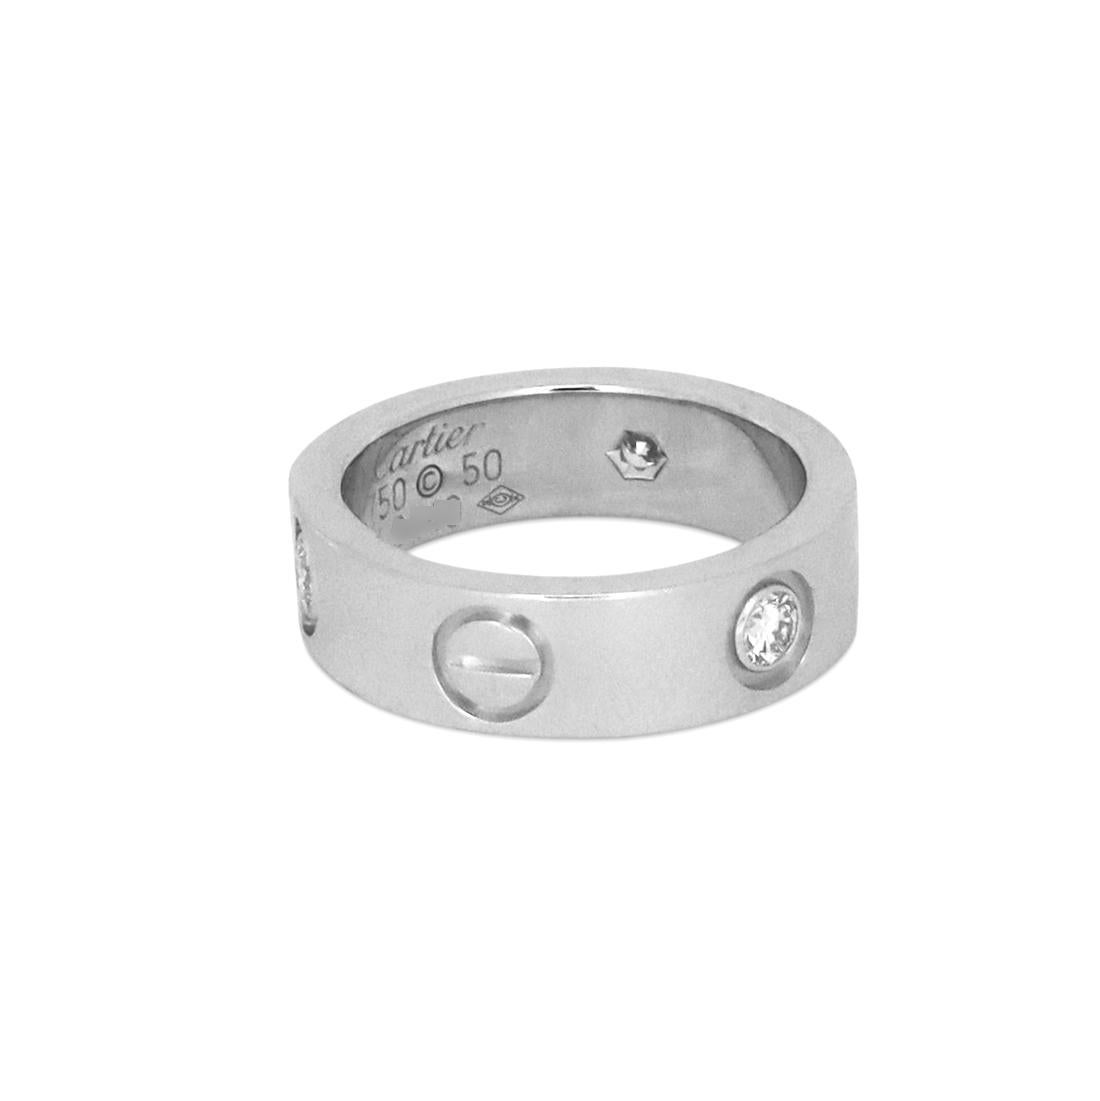 Authentic Cartier 'Love' ring crafted in 18 karat white gold and set with three round brilliant cut diamonds (G, VS) weighing an estimated 0.22 carats total weight. Ring size 50 (US 5 1/4). Signed Cartier, 750, 50, with serial number. The ring is